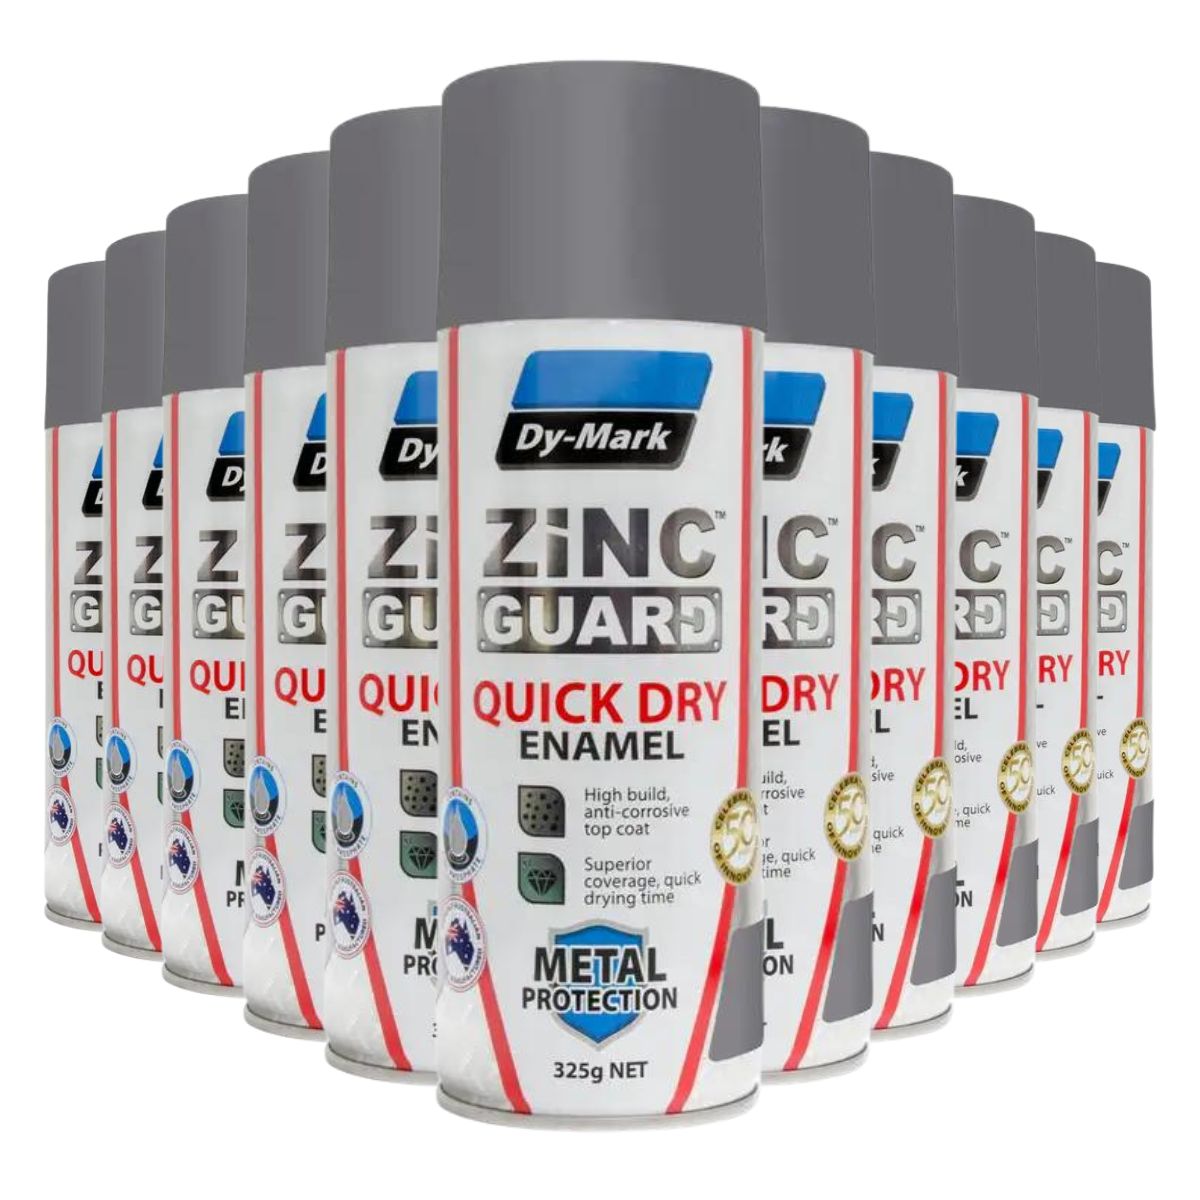 Dy-Mark Zinc Guard Quick Dry 325g | 12 Cans - South East Clearance Centre